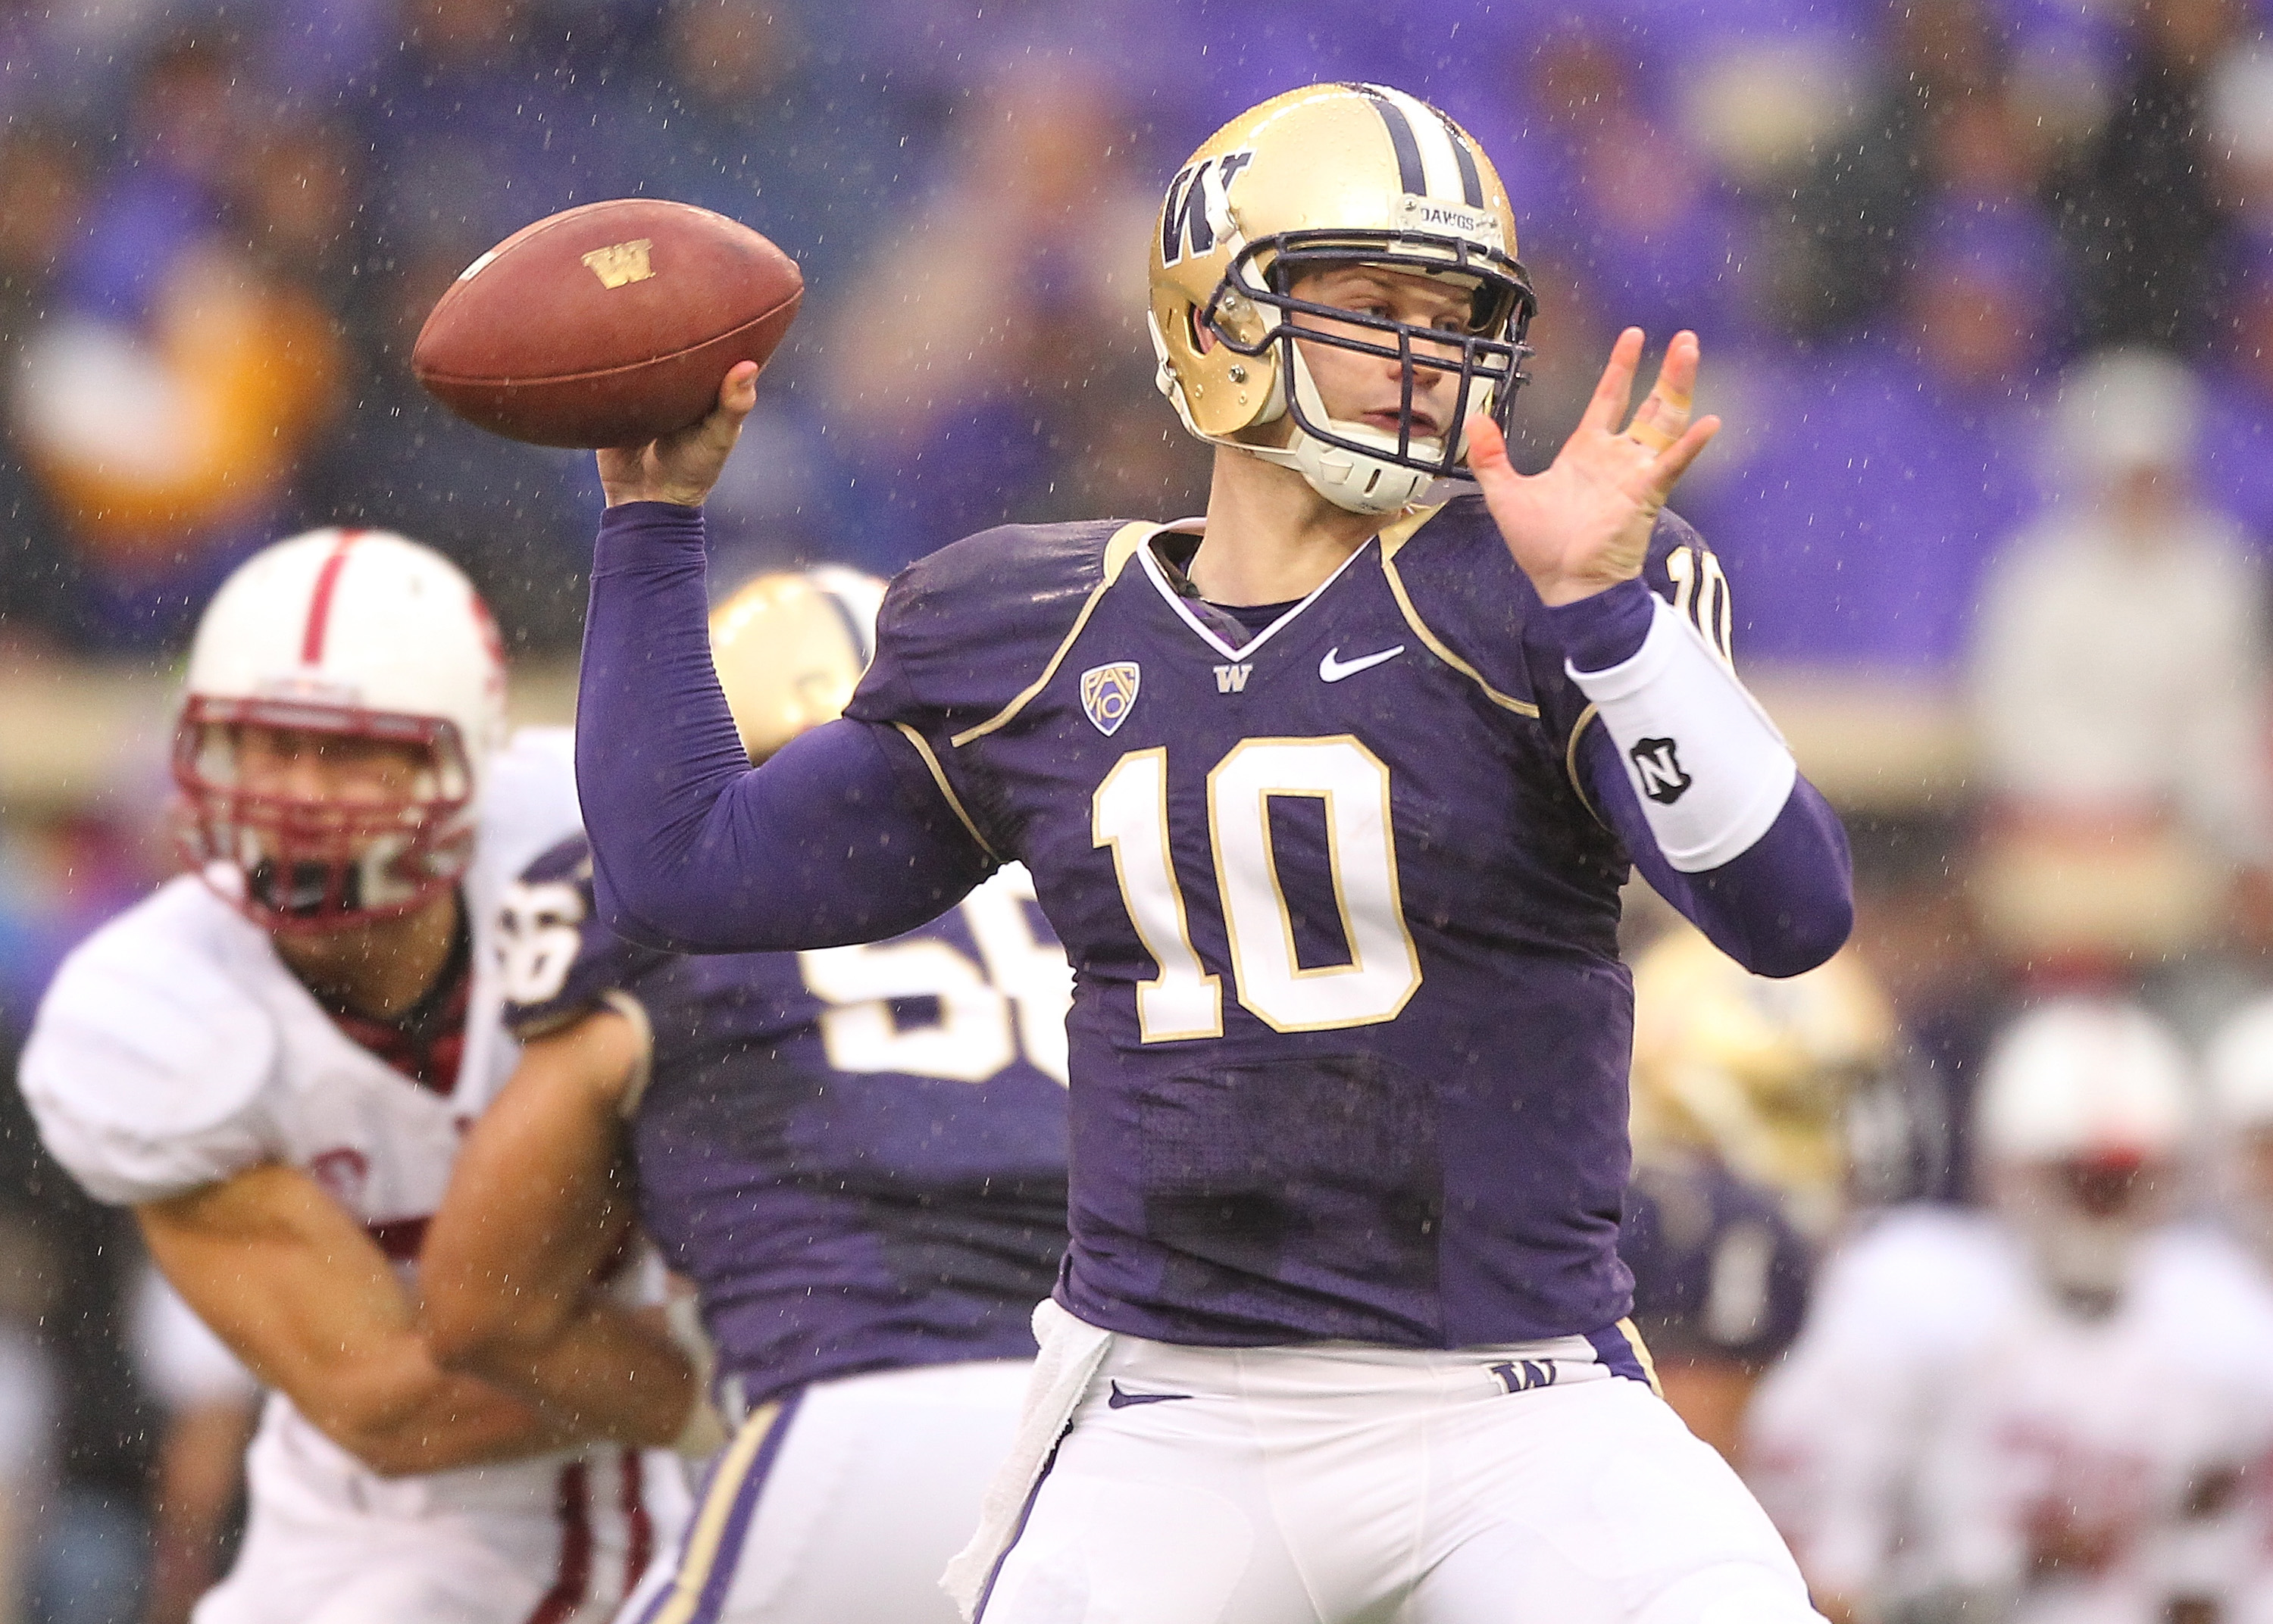 SEATTLE - OCTOBER 30:  Quarterback Jake Locker #10 of the Washington Huskies passes against the Stanford Cardinal on October 30, 2010 at Husky Stadium in Seattle, Washington. (Photo by Otto Greule Jr/Getty Images)